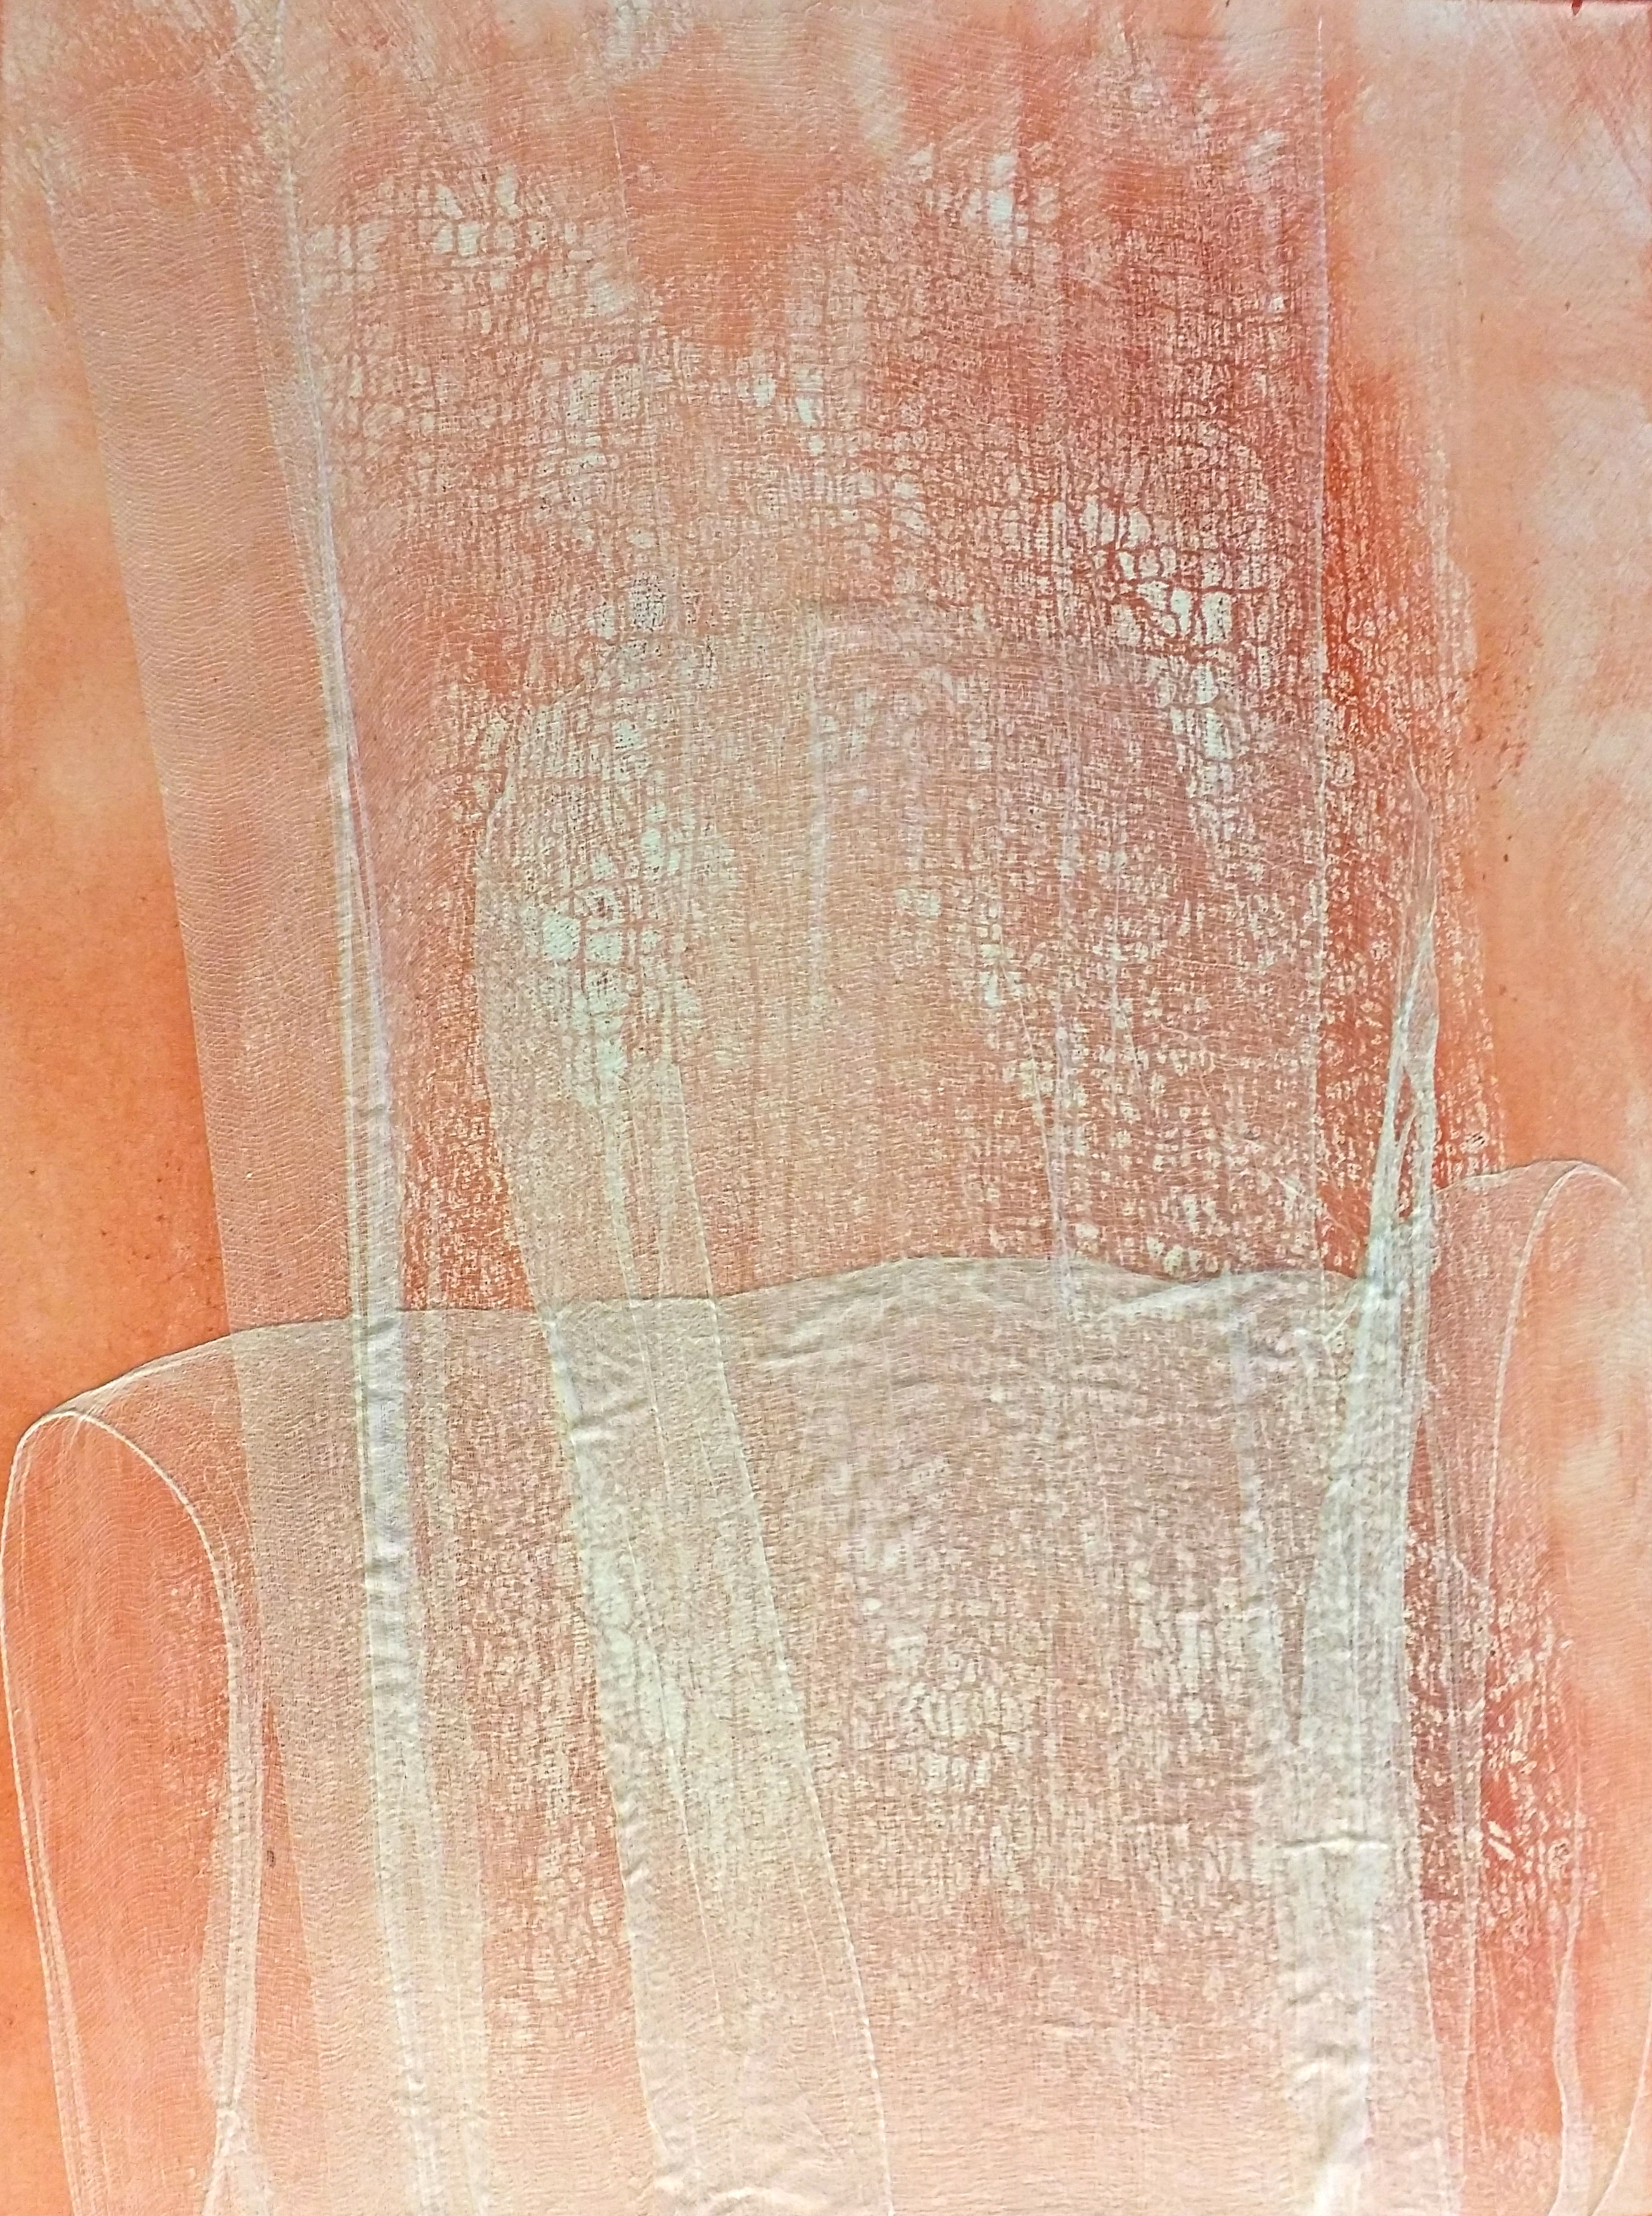  Weightlessness 12, 2015 60 x 36 inches Acrylic, gauze, glue, mixed media on canvas 